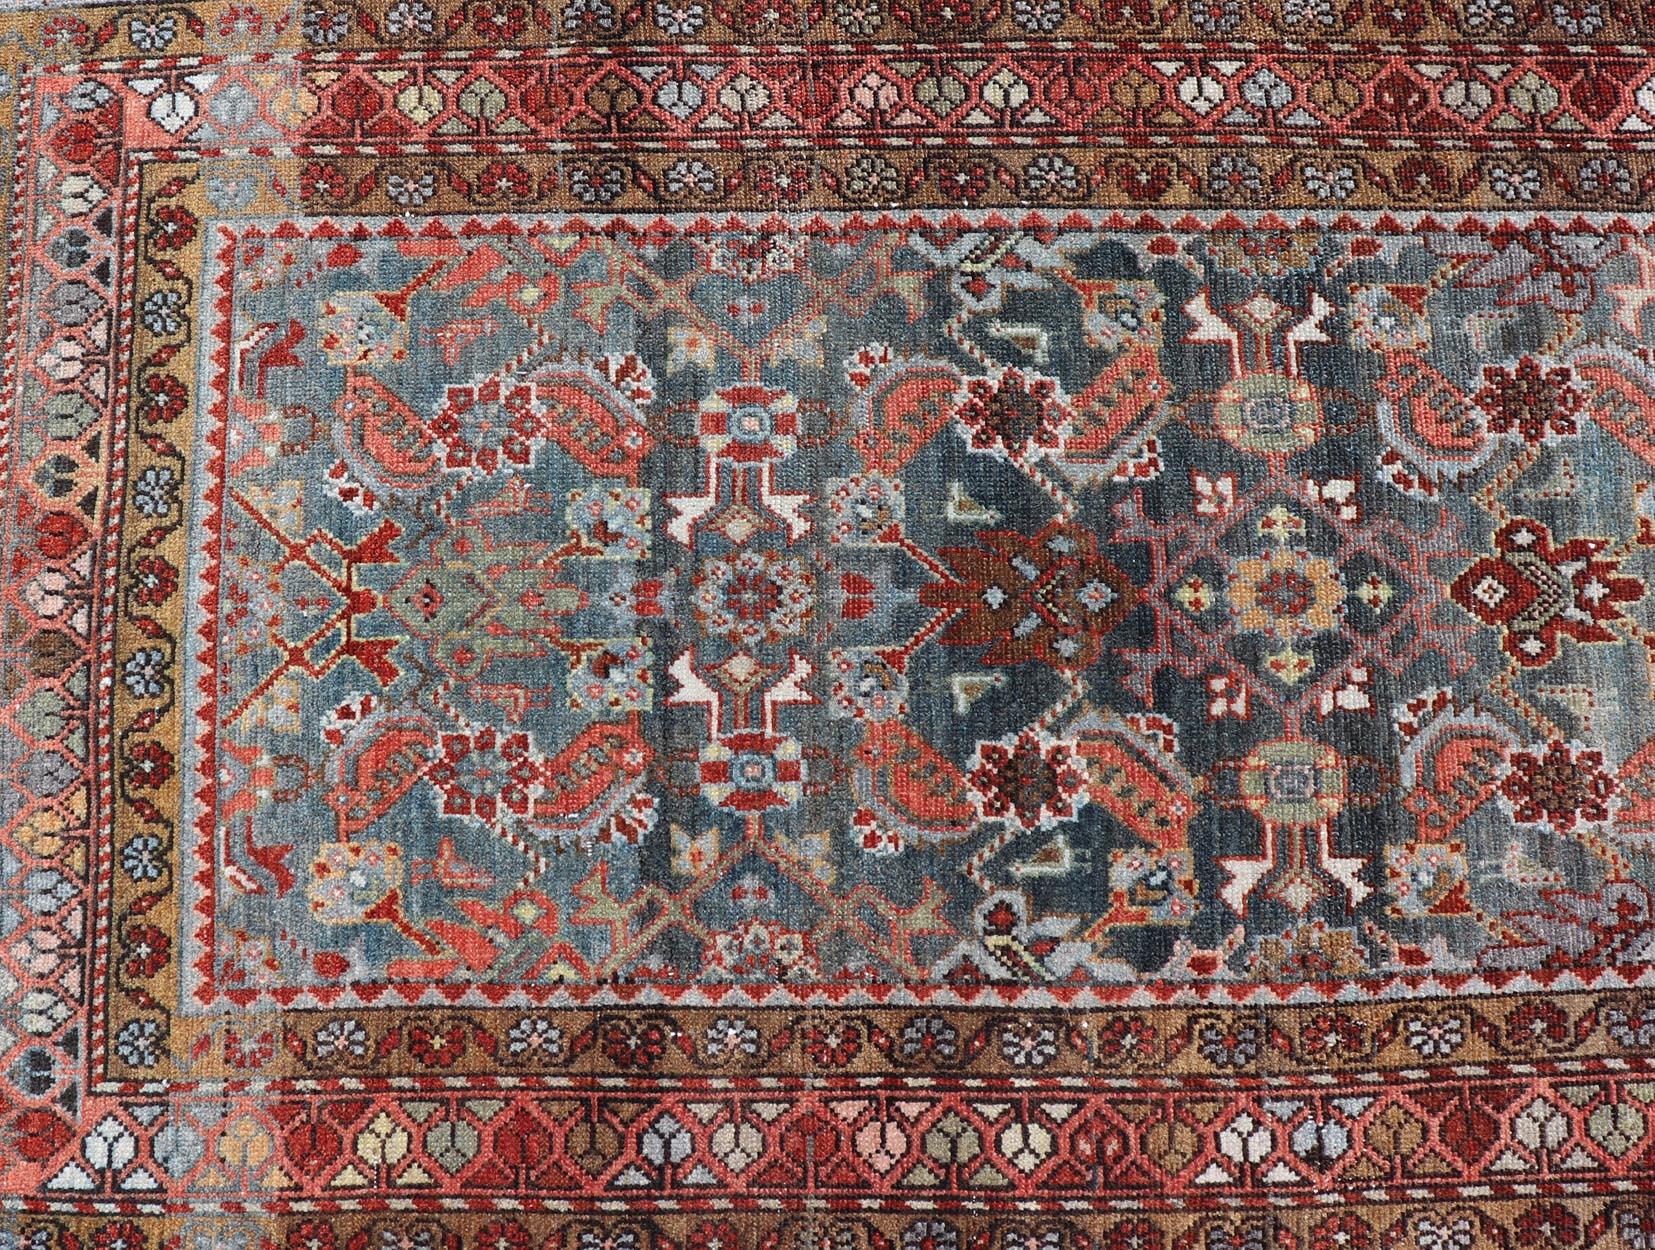 N.W. Persian Antique Runner with Geometric Florals Set on a Blue Field For Sale 4